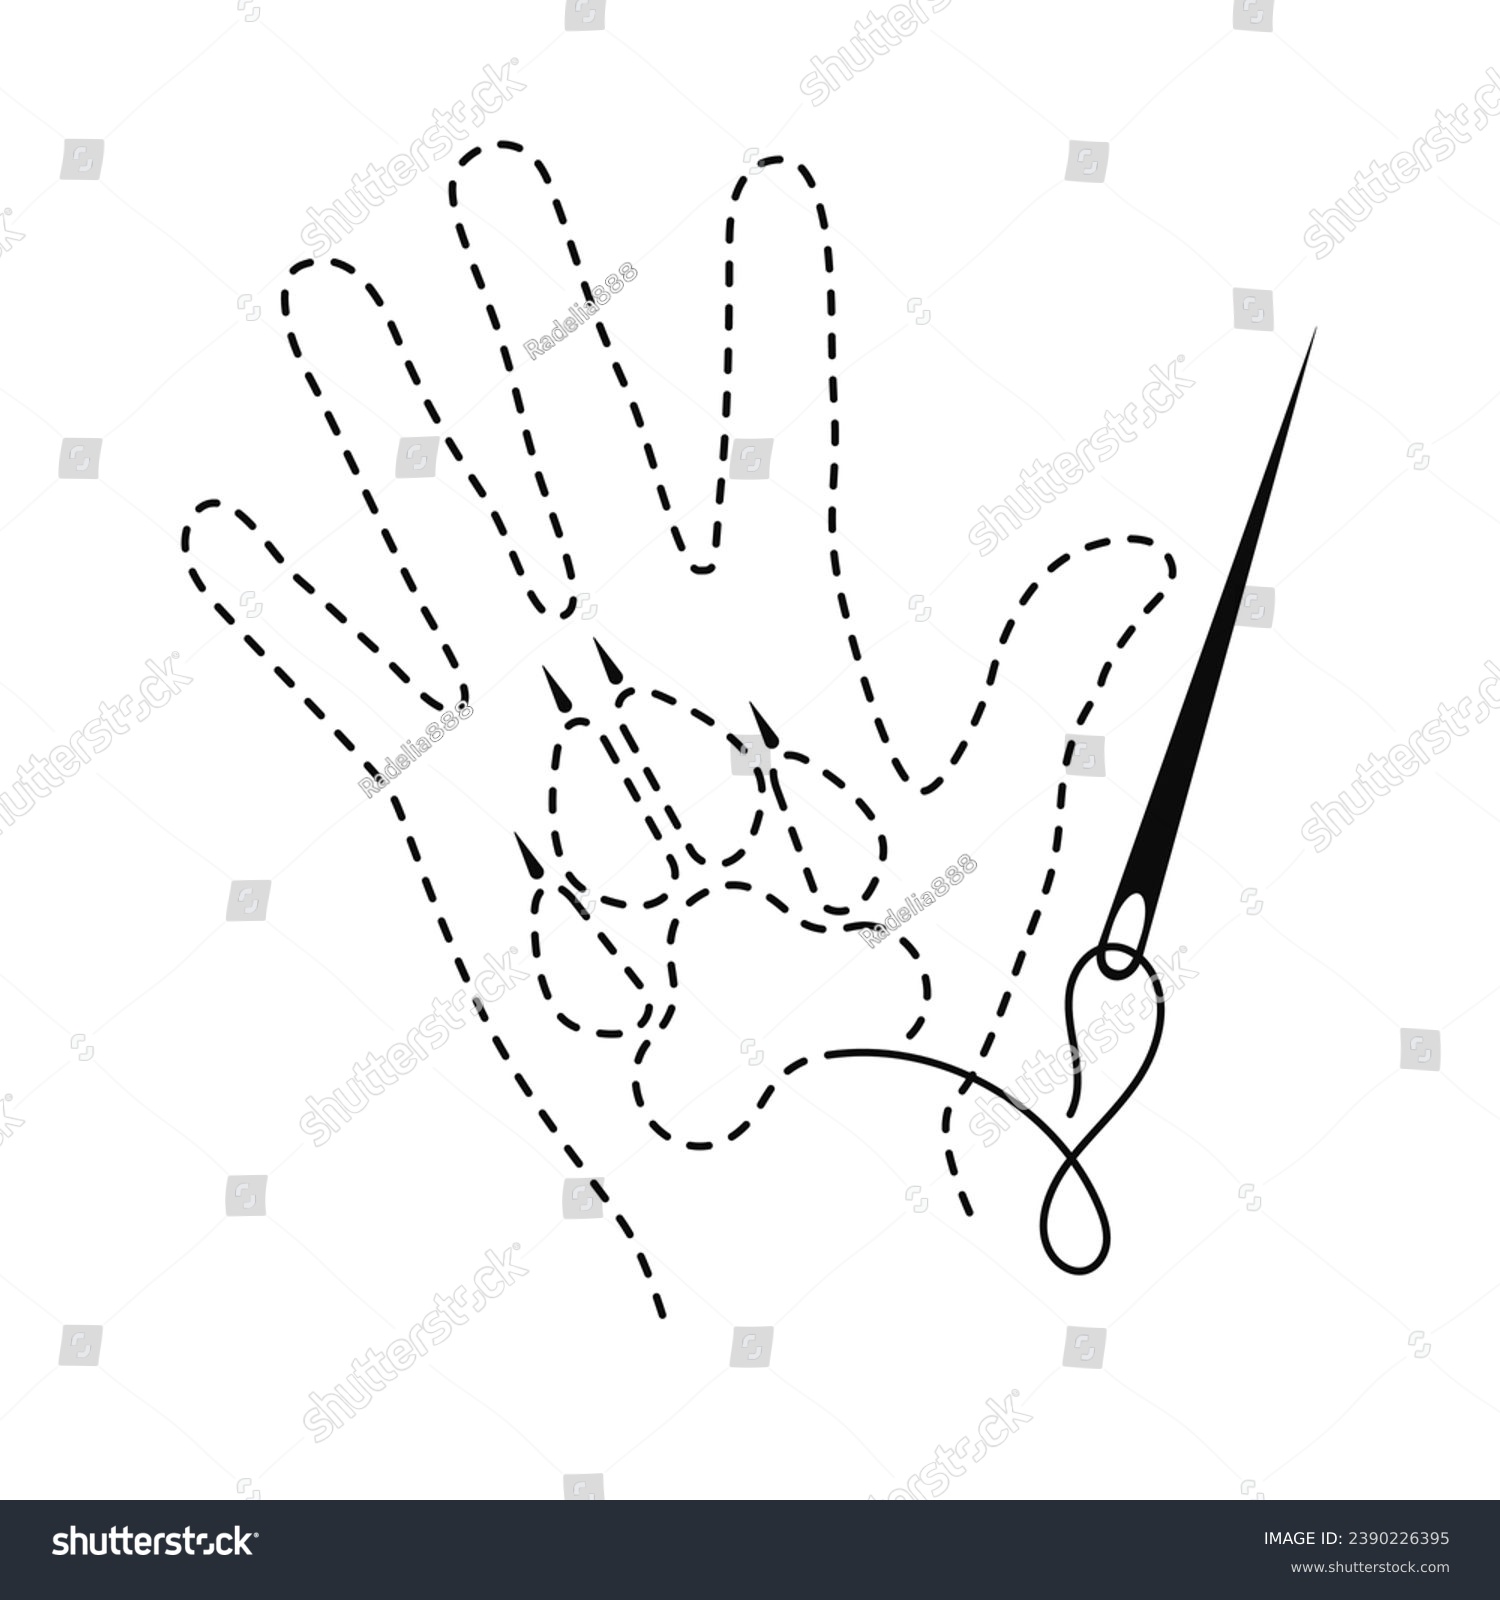 SVG of Silhouette of hand and wolf paw with interrupted contour. Vector illustration of handmade work with embroidery thread and sewing needle on white background. svg